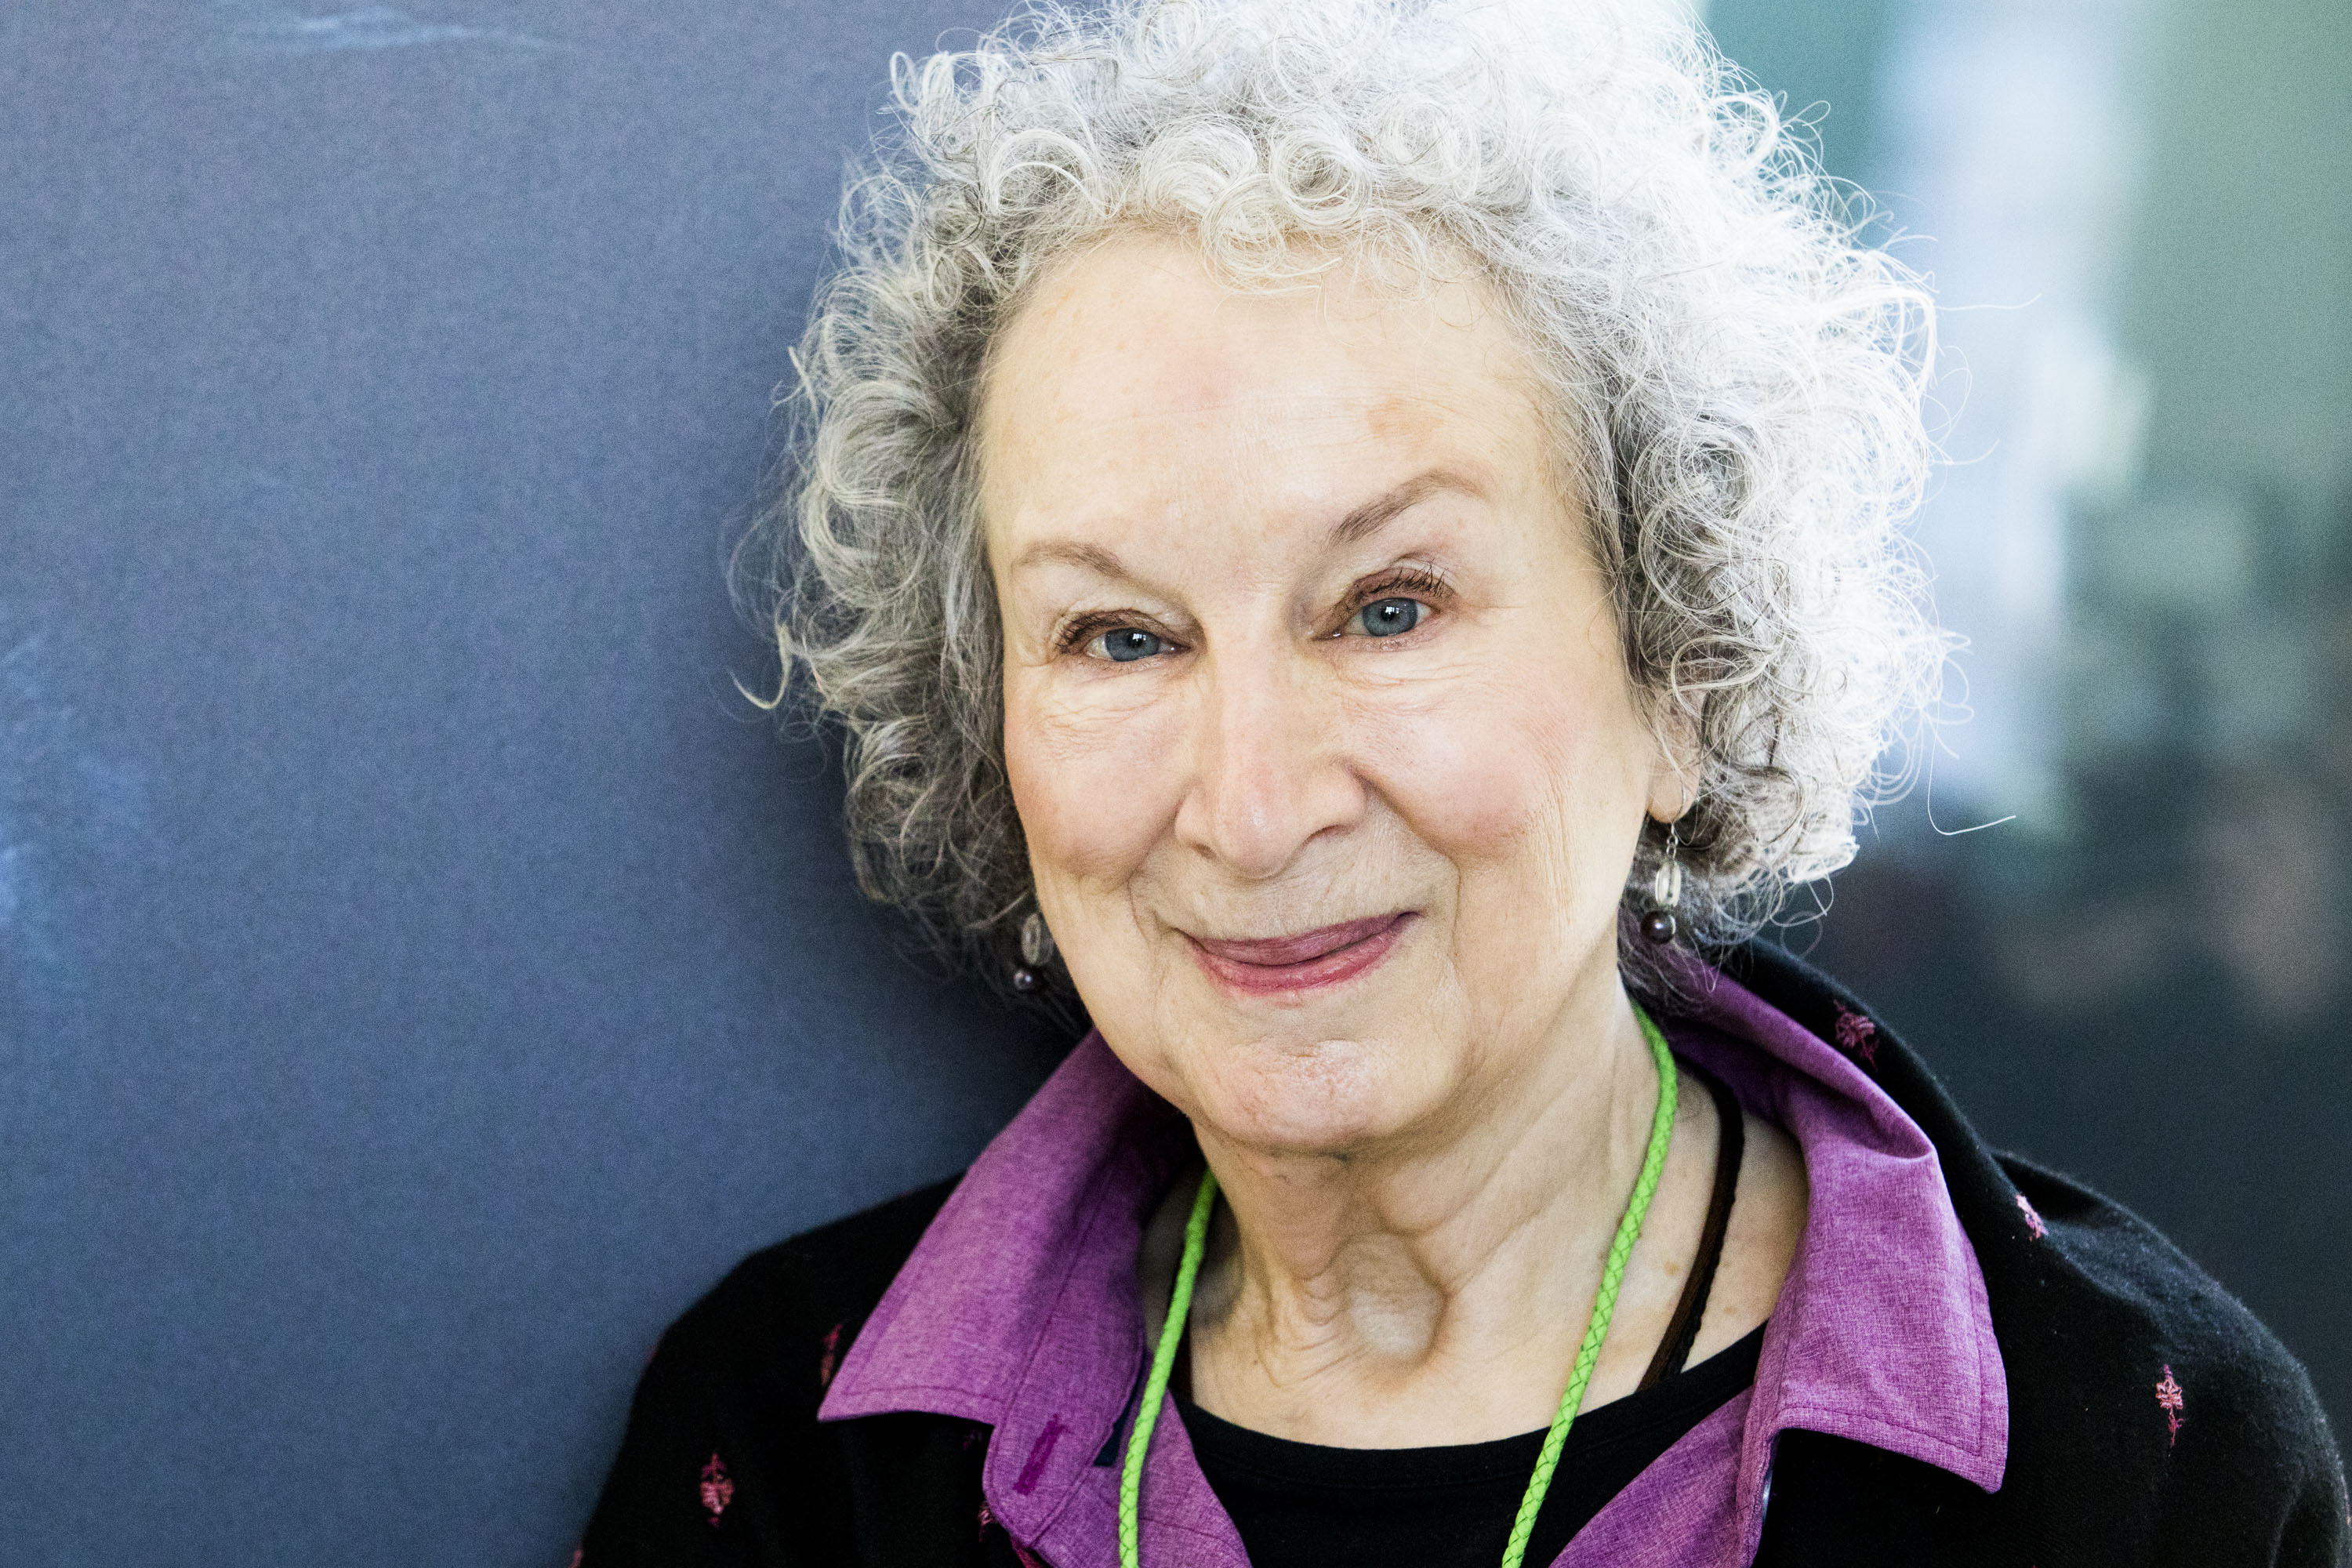 The Handmaid's Tale author Margaret Atwood smiling